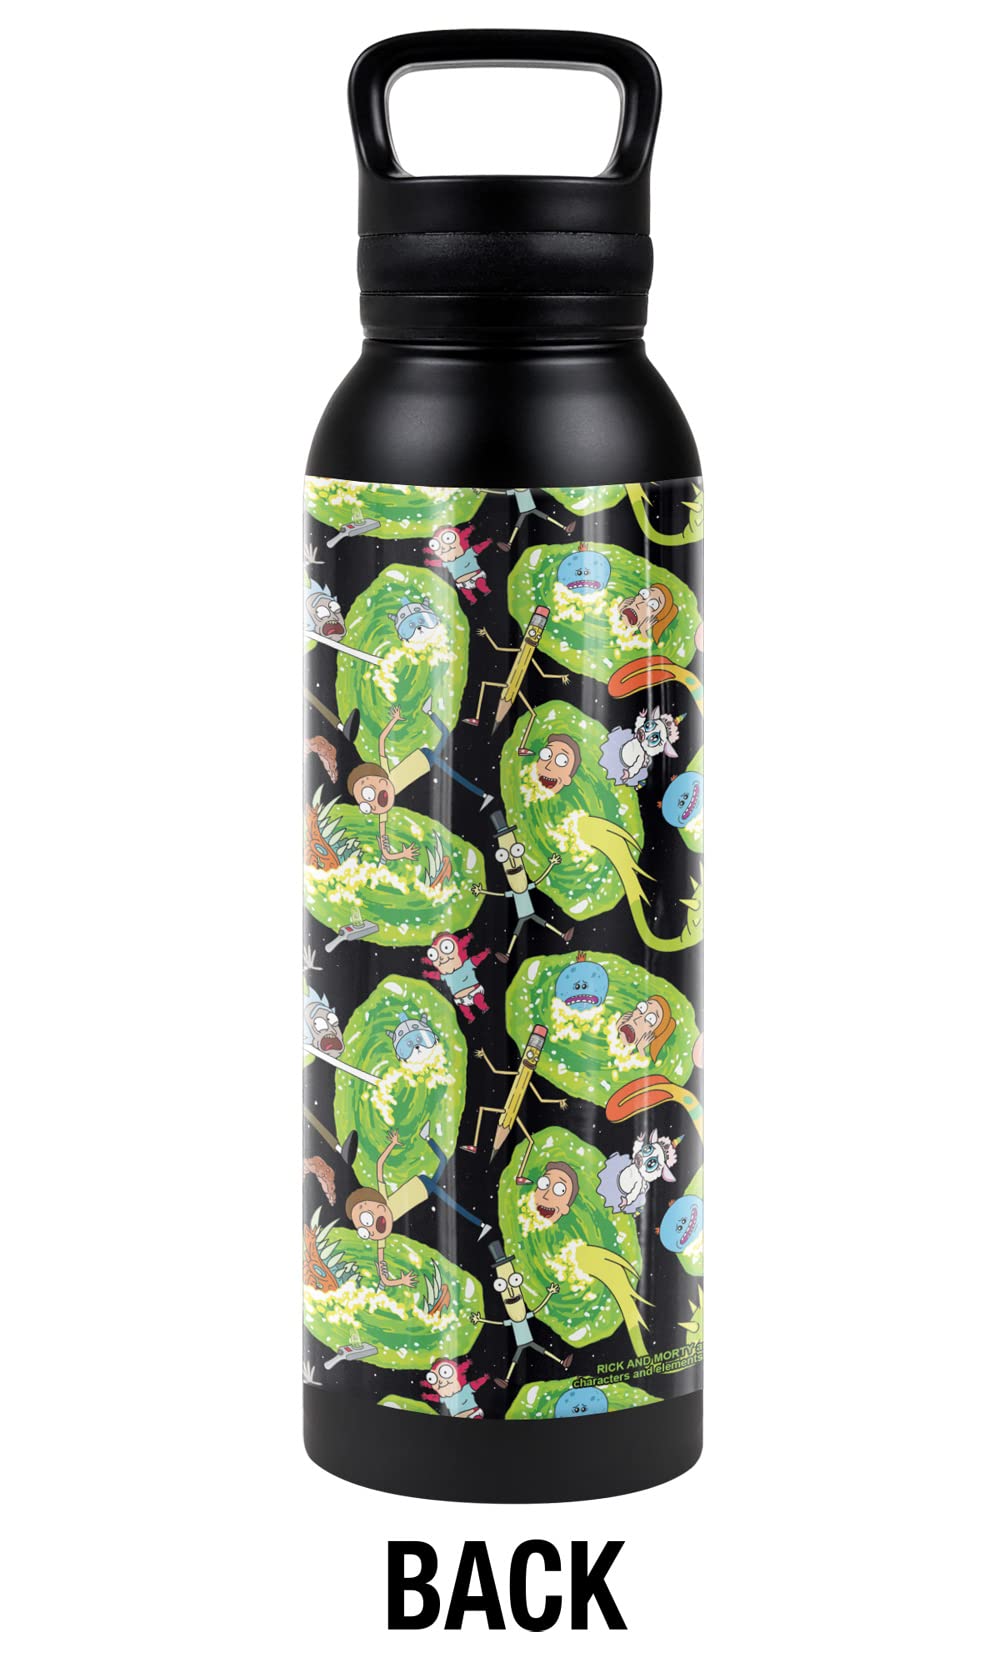 Rick And Morty OFFICIAL Portal Mayhem 24 oz Insulated Canteen Water Bottle, Leak Resistant, Vacuum Insulated Stainless Steel with Loop Cap, Black